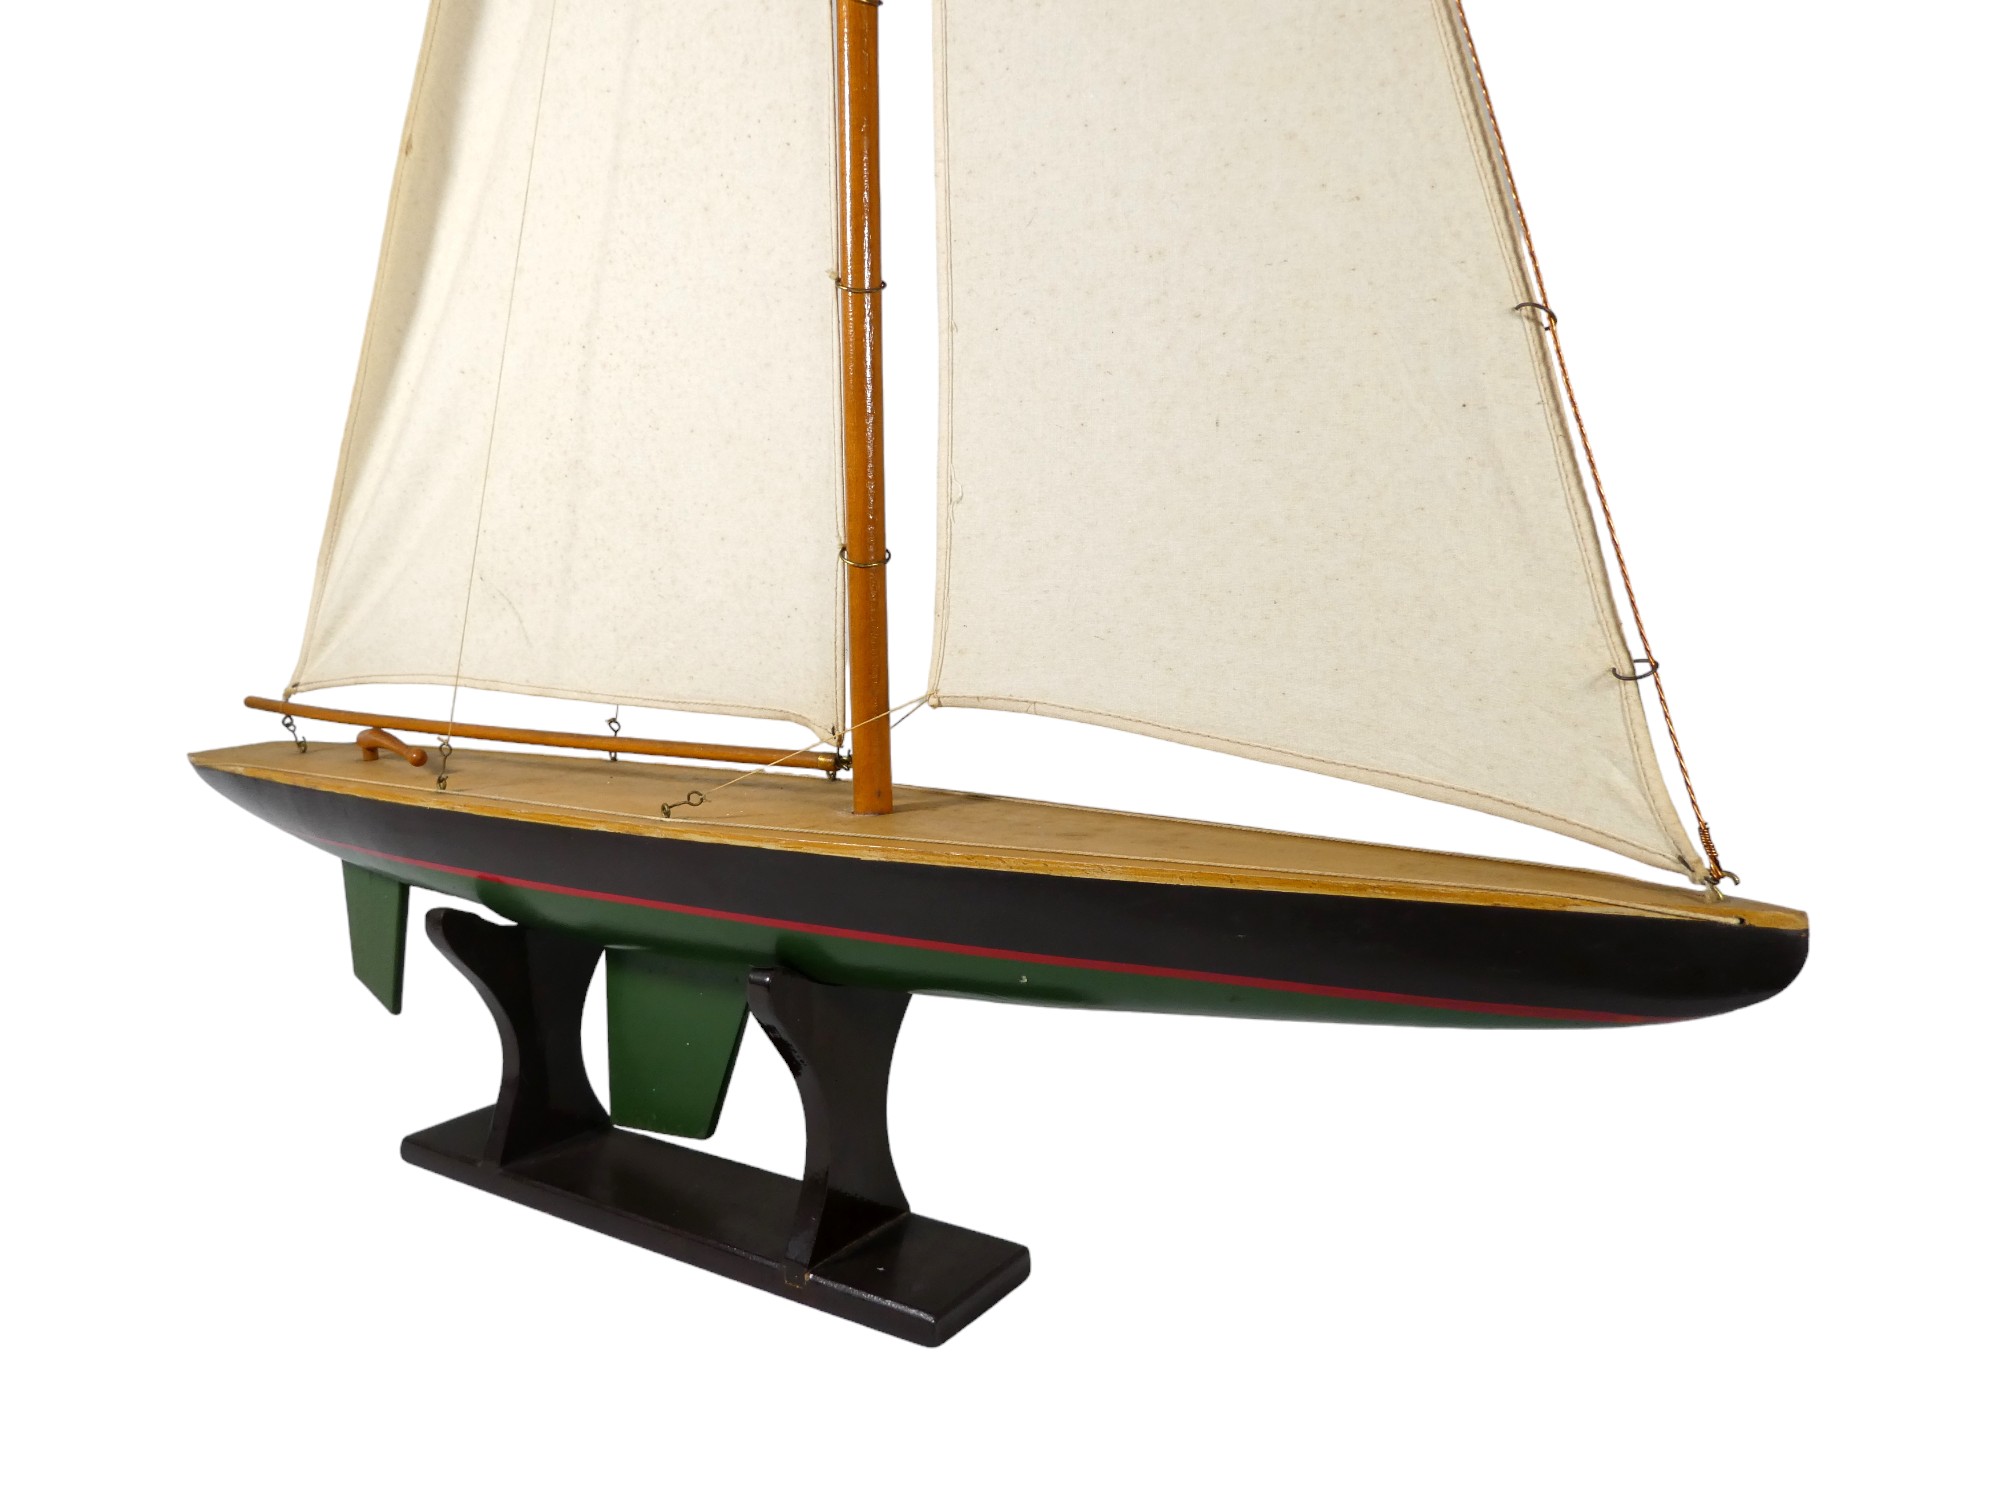 A 20th century pond yacht - Bermuda rig, with black hull, red boot line and green hull, height - Image 4 of 4